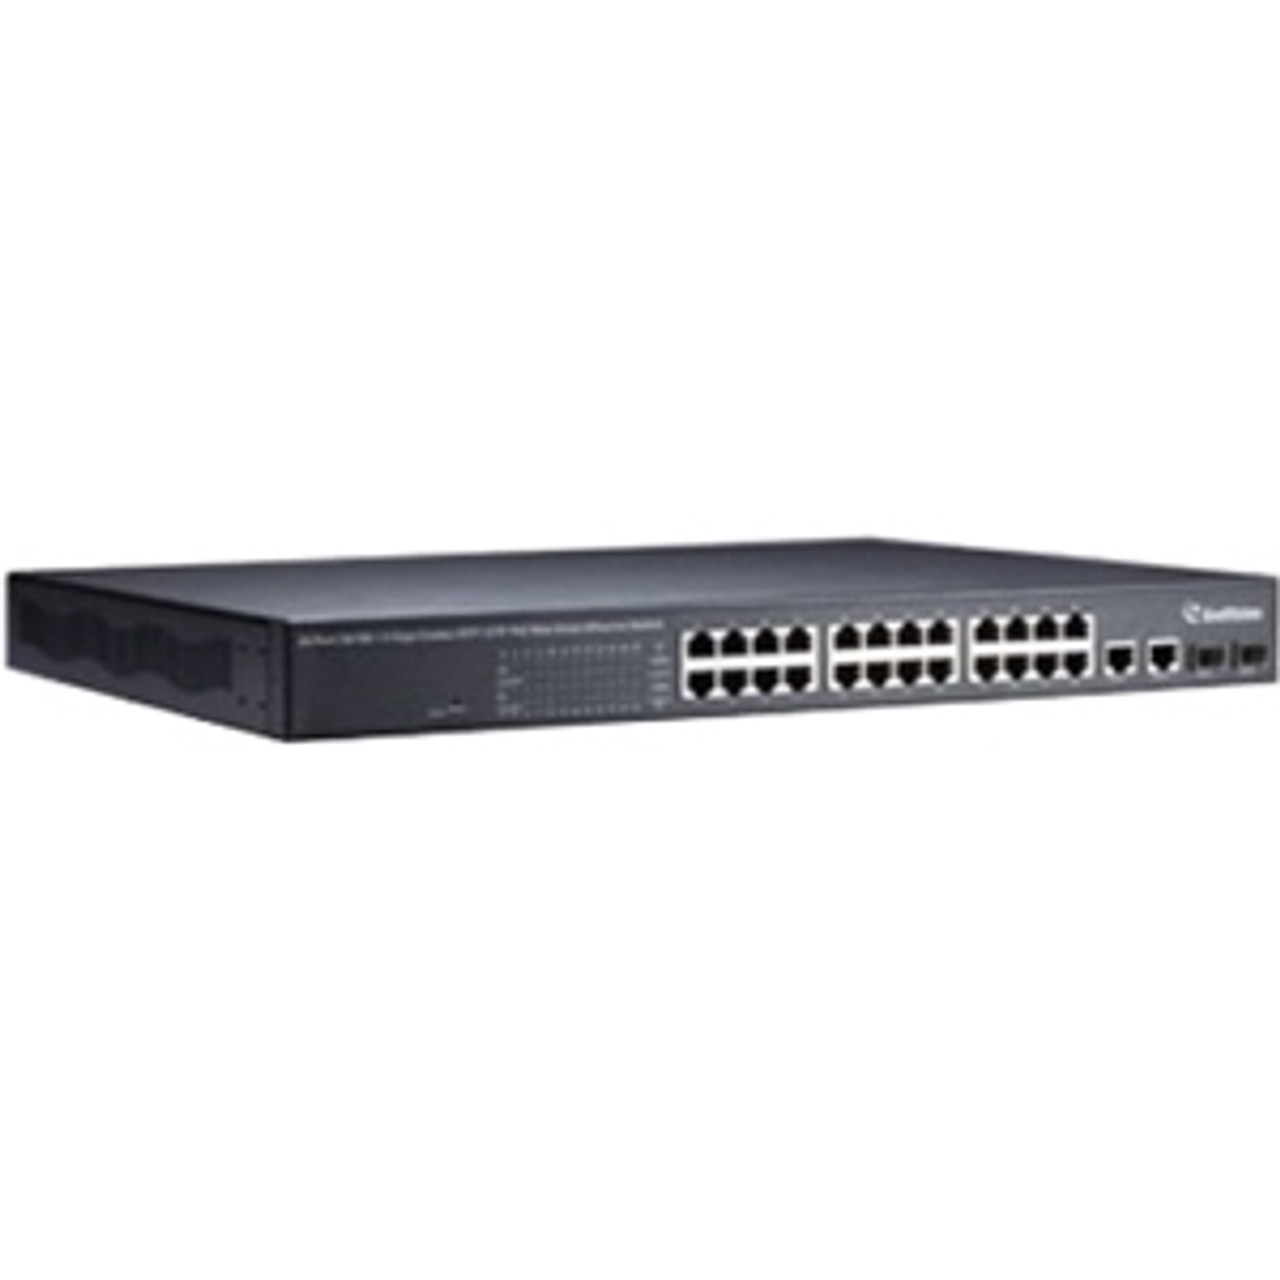 GVPOE2401 GeoVision GV-POE2401 24-Port 802.3at Web Management PoE Switch Manageable Modular 2 Layer Supported Rack-mountable, Under Table (Refurbished)